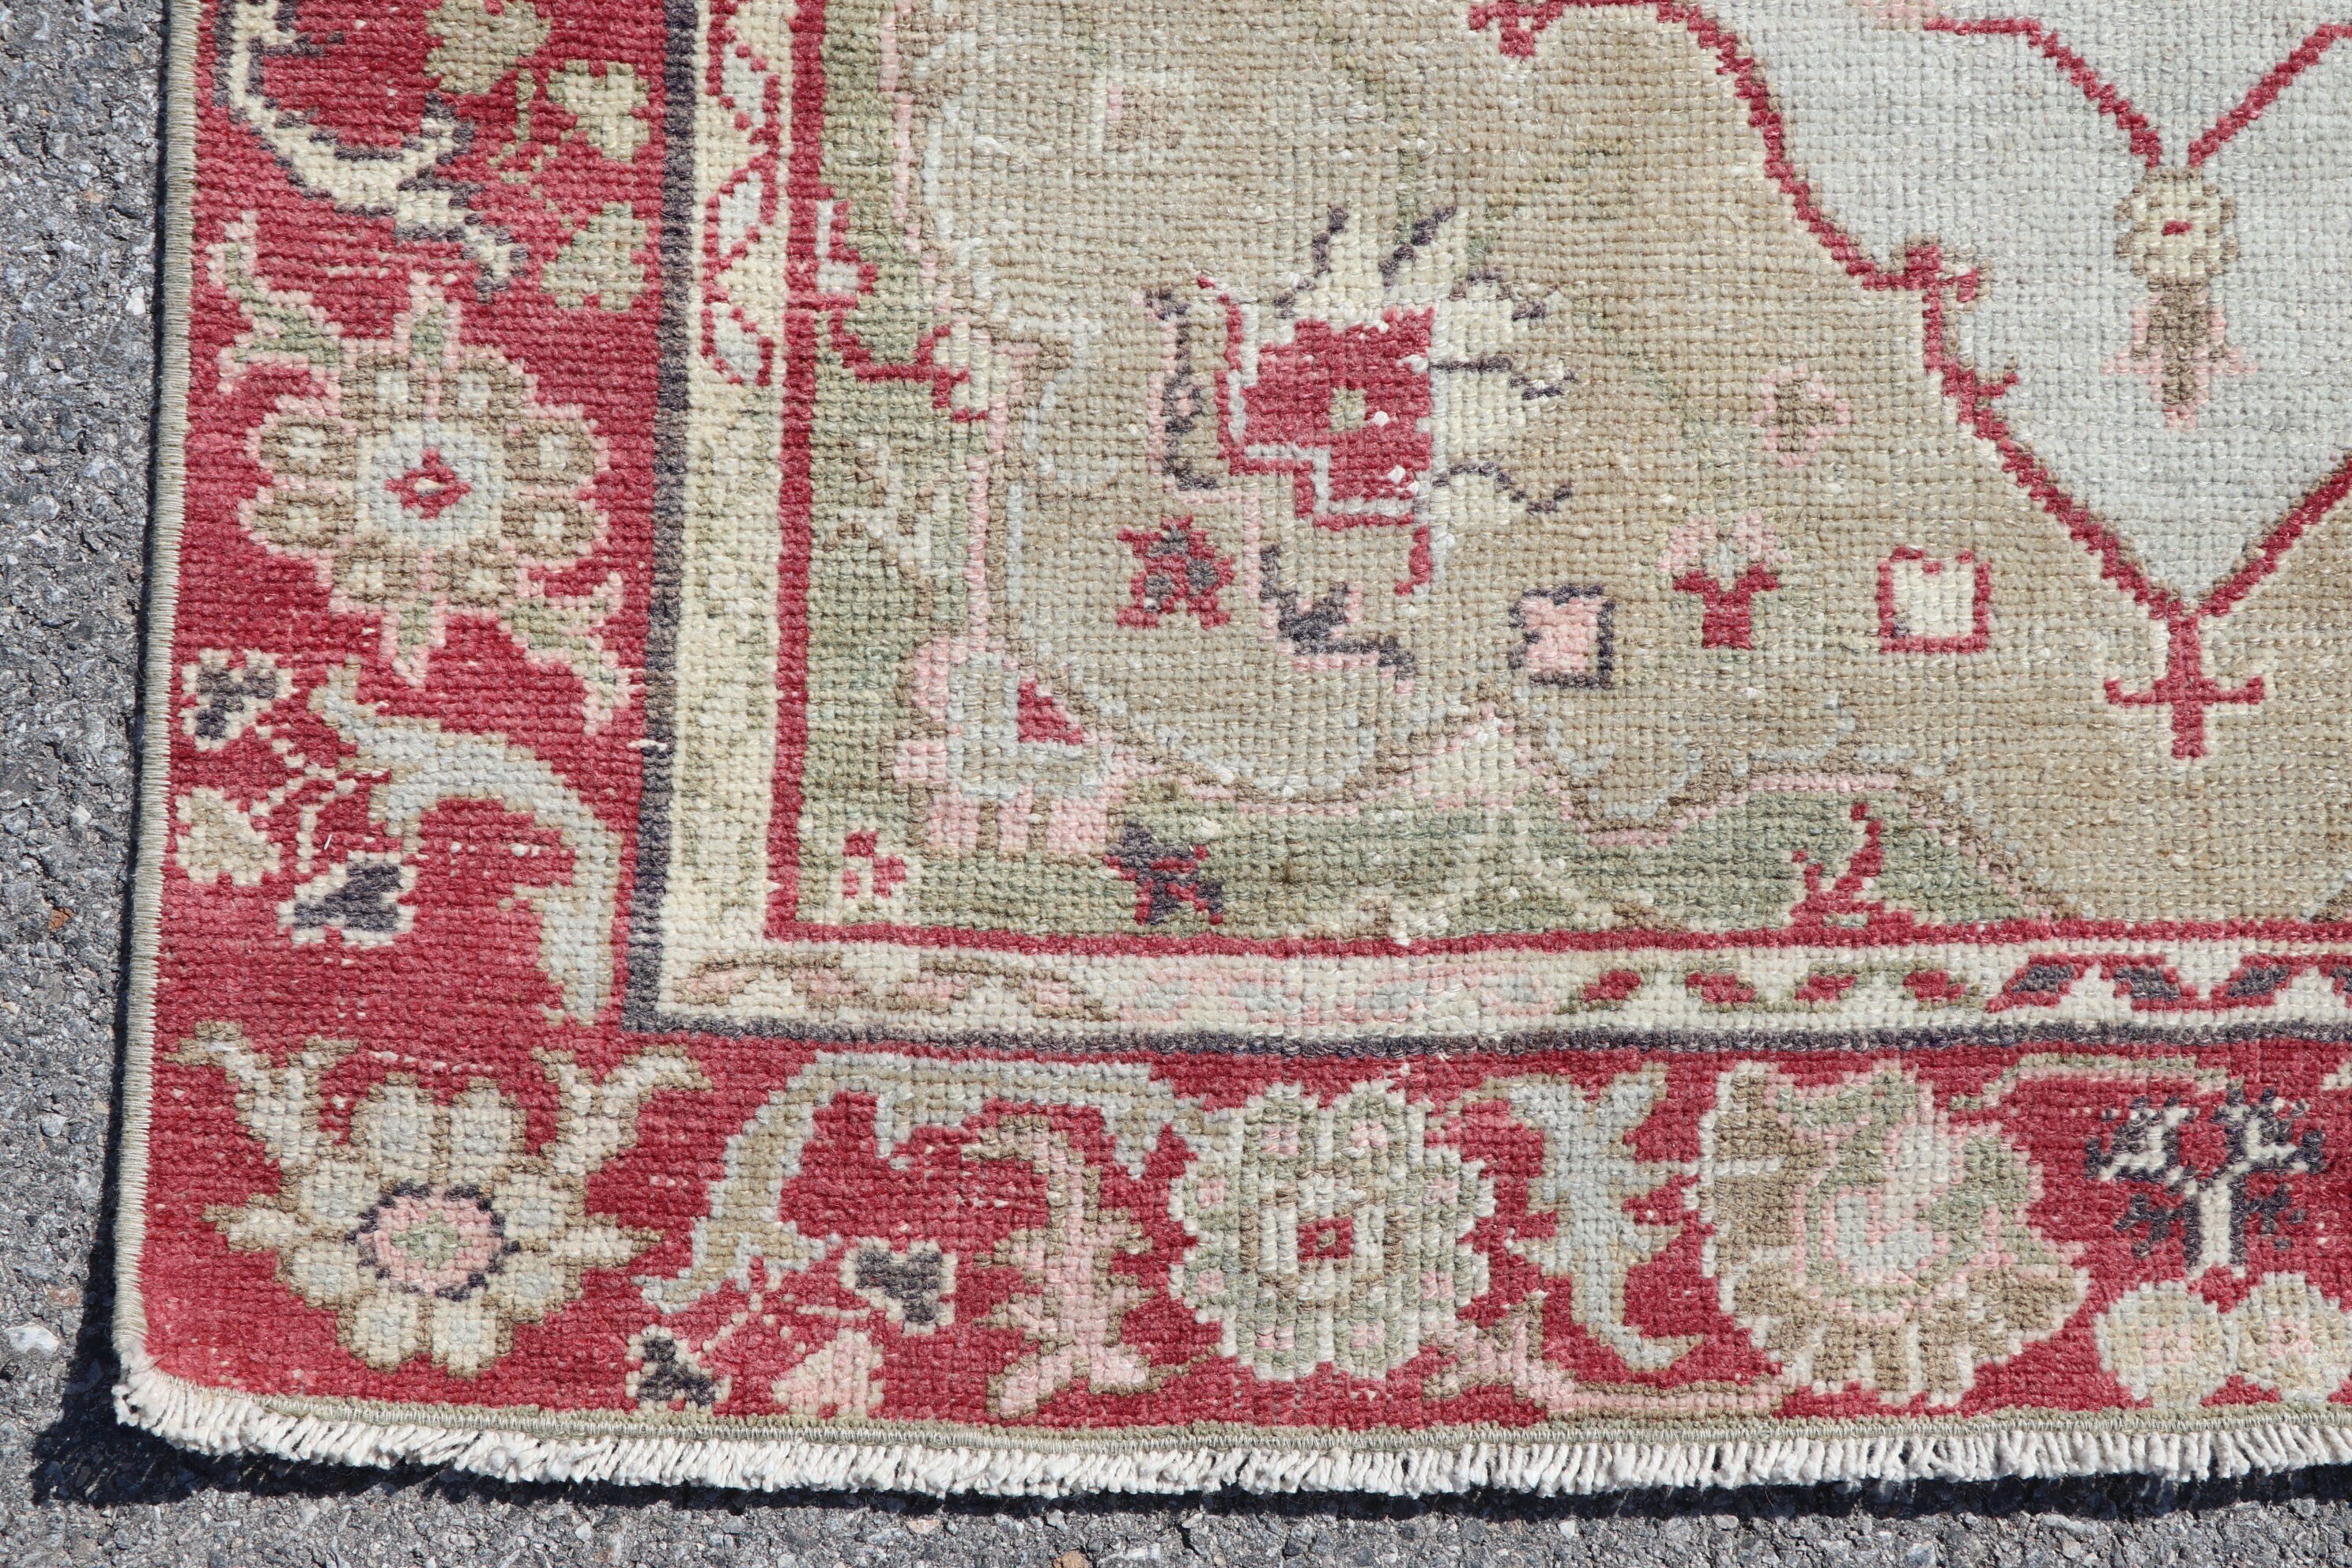 Turkish Rugs, Oushak Rug, Retro Rugs, Vintage Rugs, Red Antique Rug, 3.6x7.9 ft Area Rugs, Rugs for Dining Room, Indoor Rugs, Antique Rugs